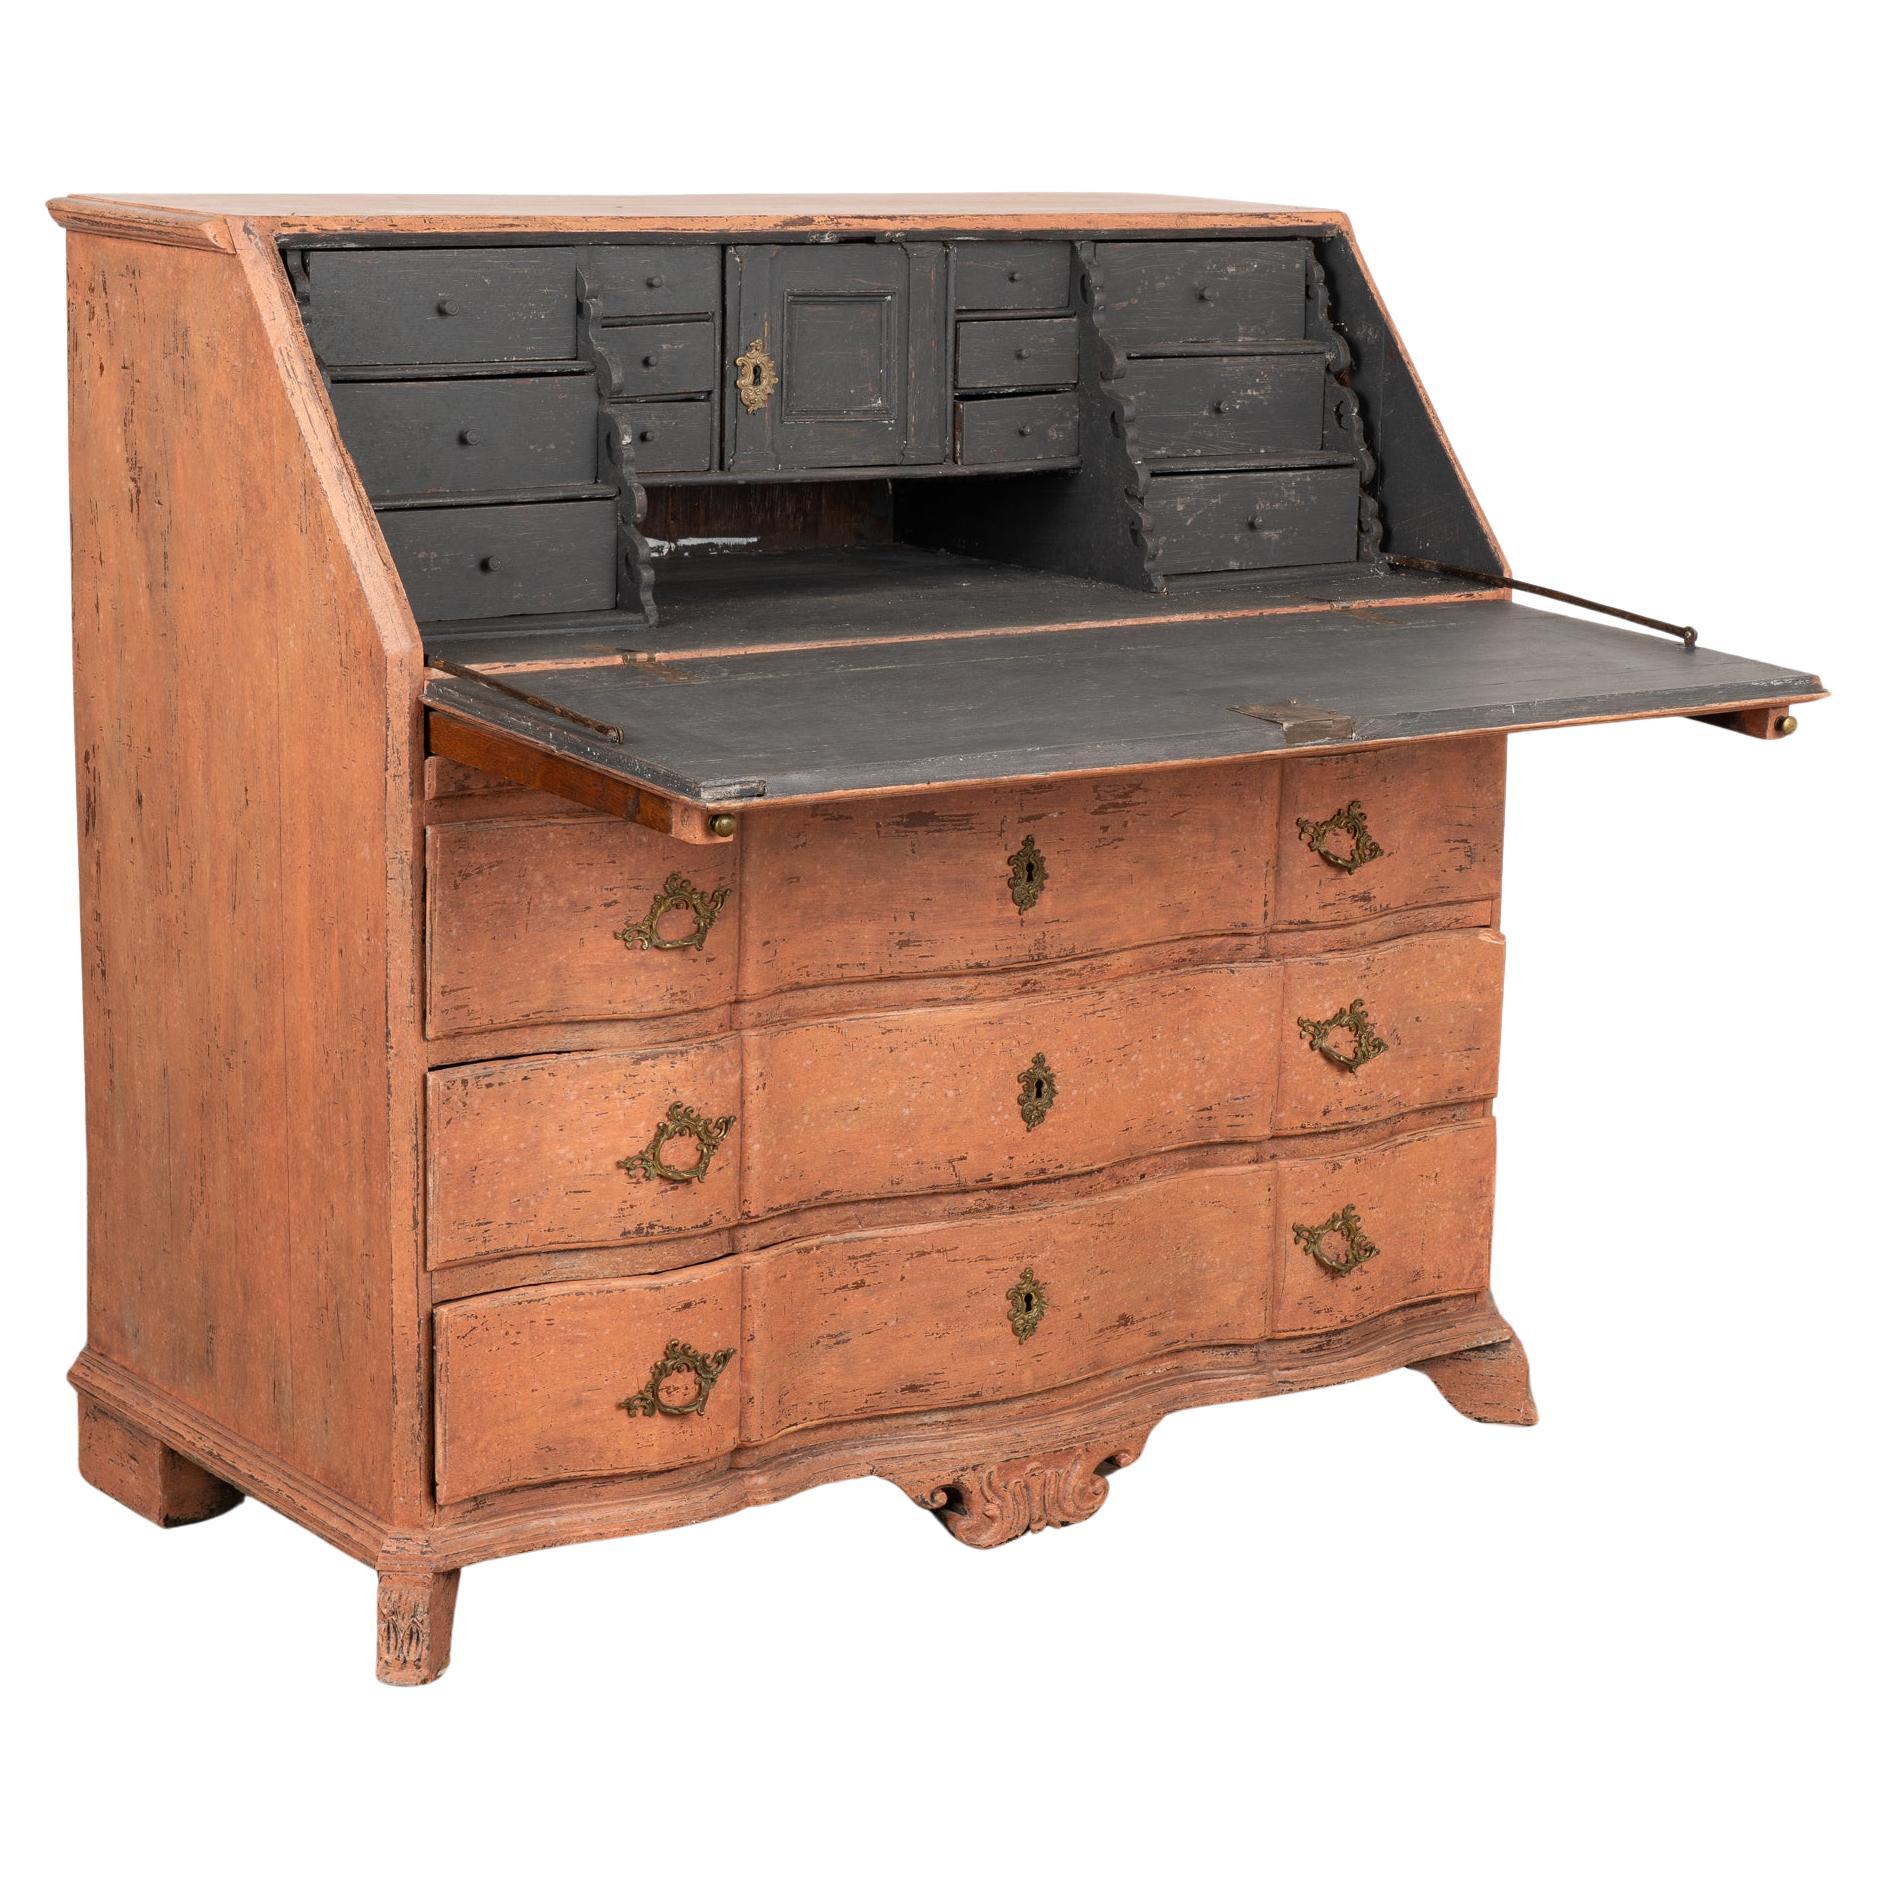 Oak Secretary Bureau With Painted Finish from Sweden circa 1760-1800 For Sale